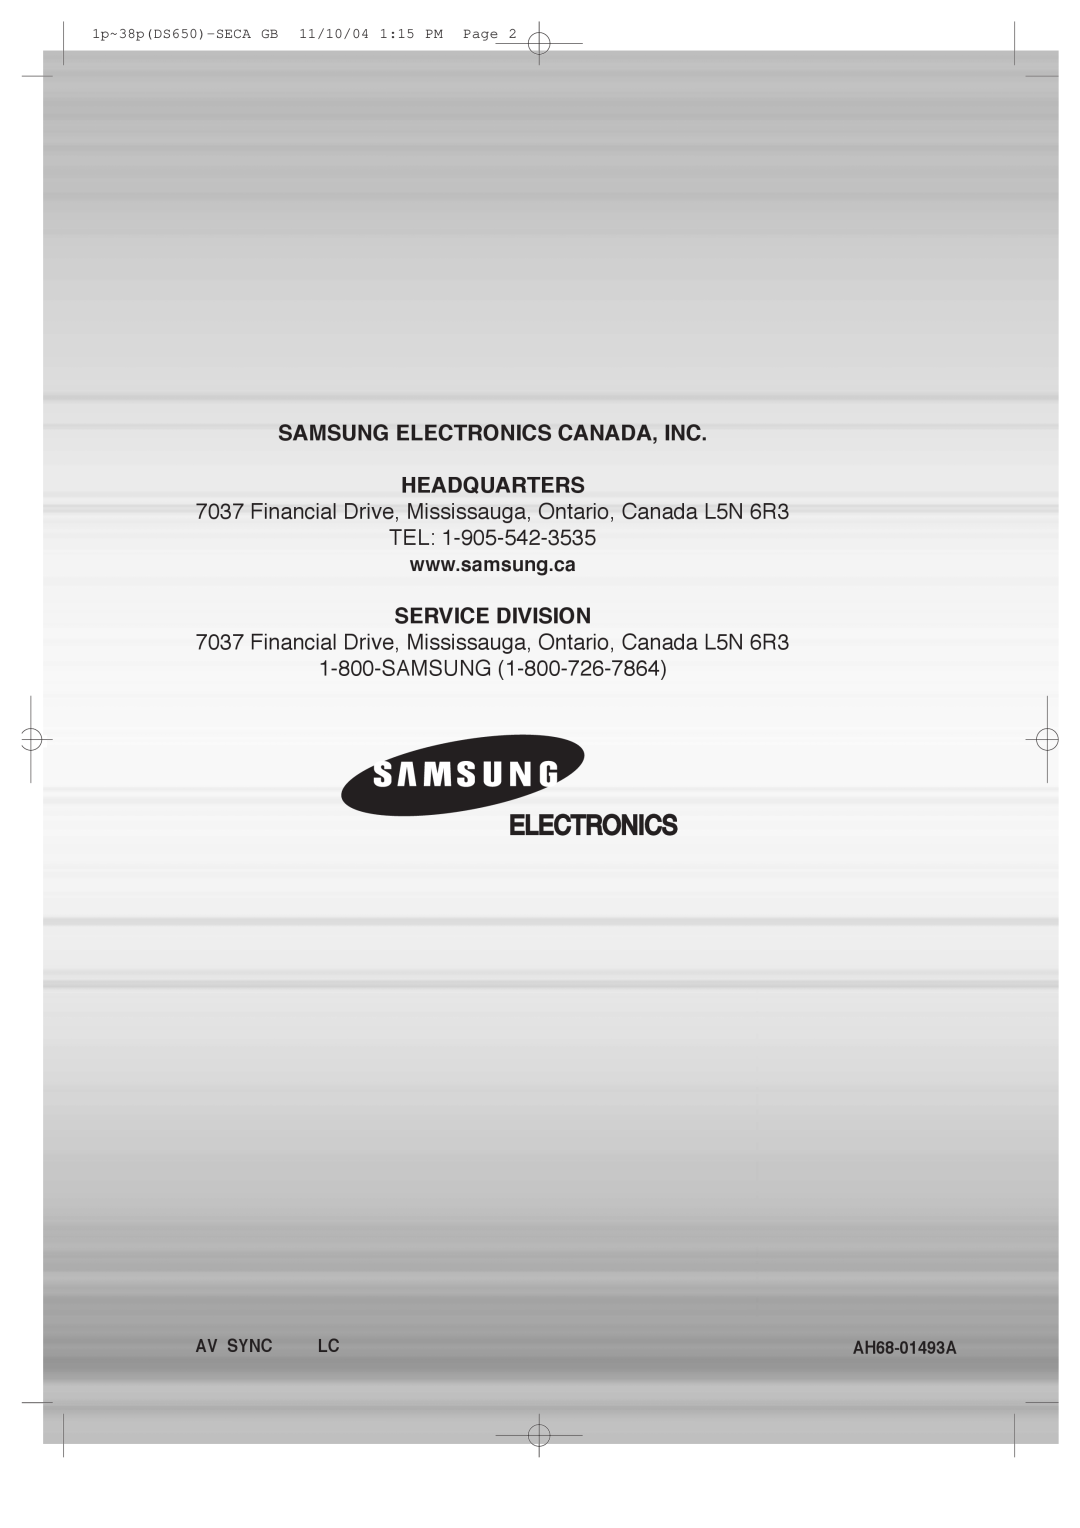 Samsung HT-DS650 instruction manual Samsung Electronics Canada, Inc Headquarters, Tel, Service Division, AH68-01493A 